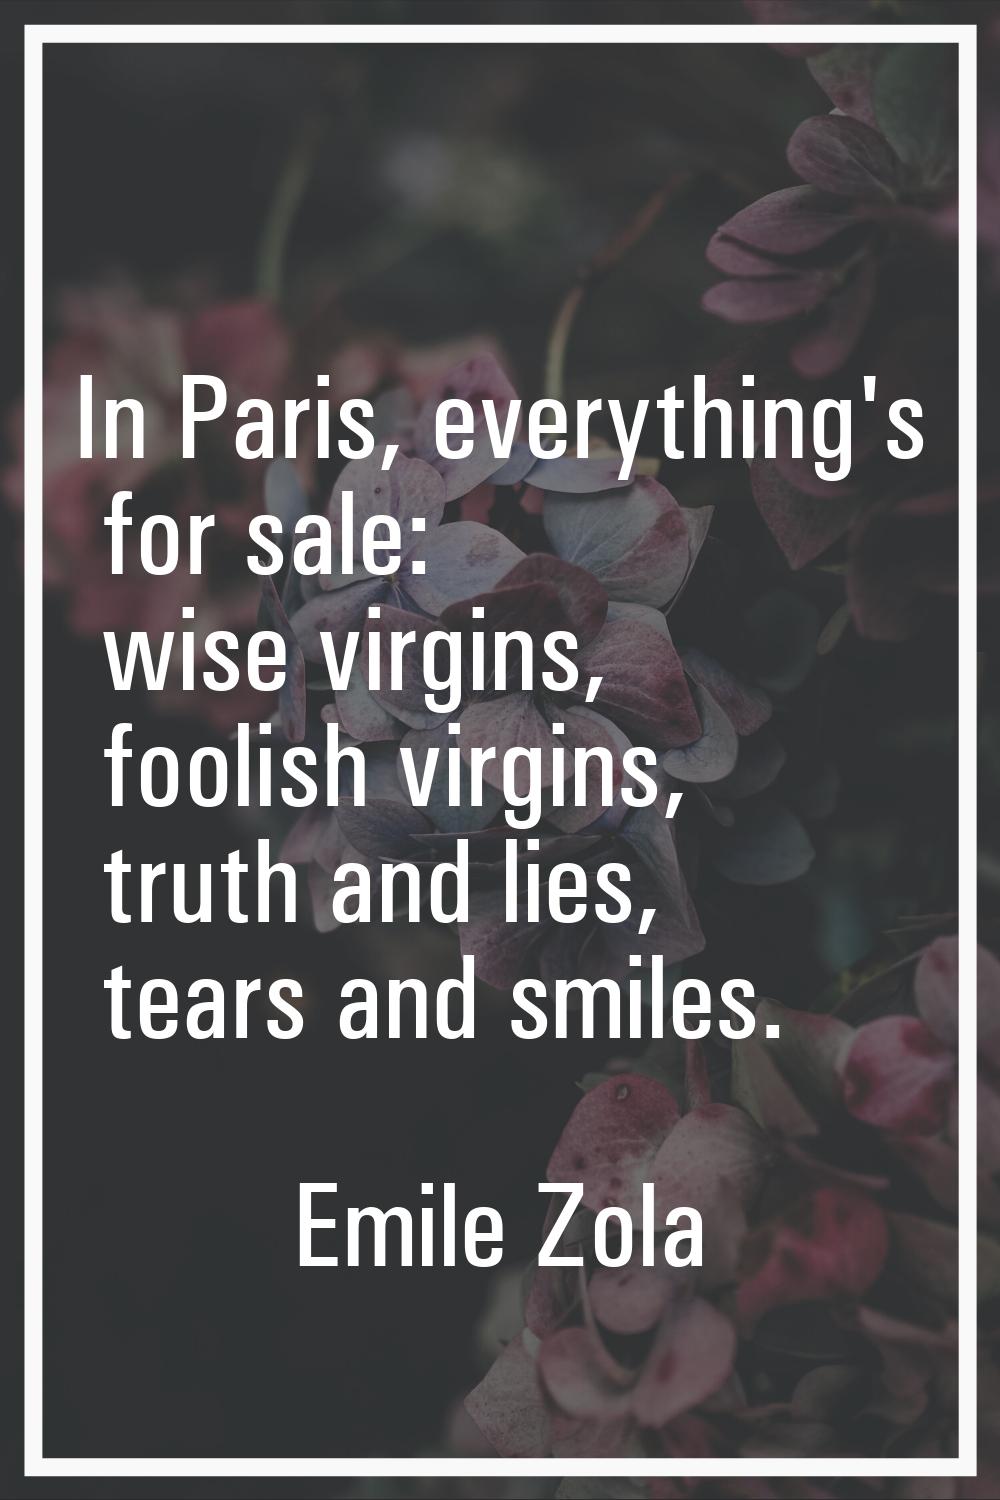 In Paris, everything's for sale: wise virgins, foolish virgins, truth and lies, tears and smiles.